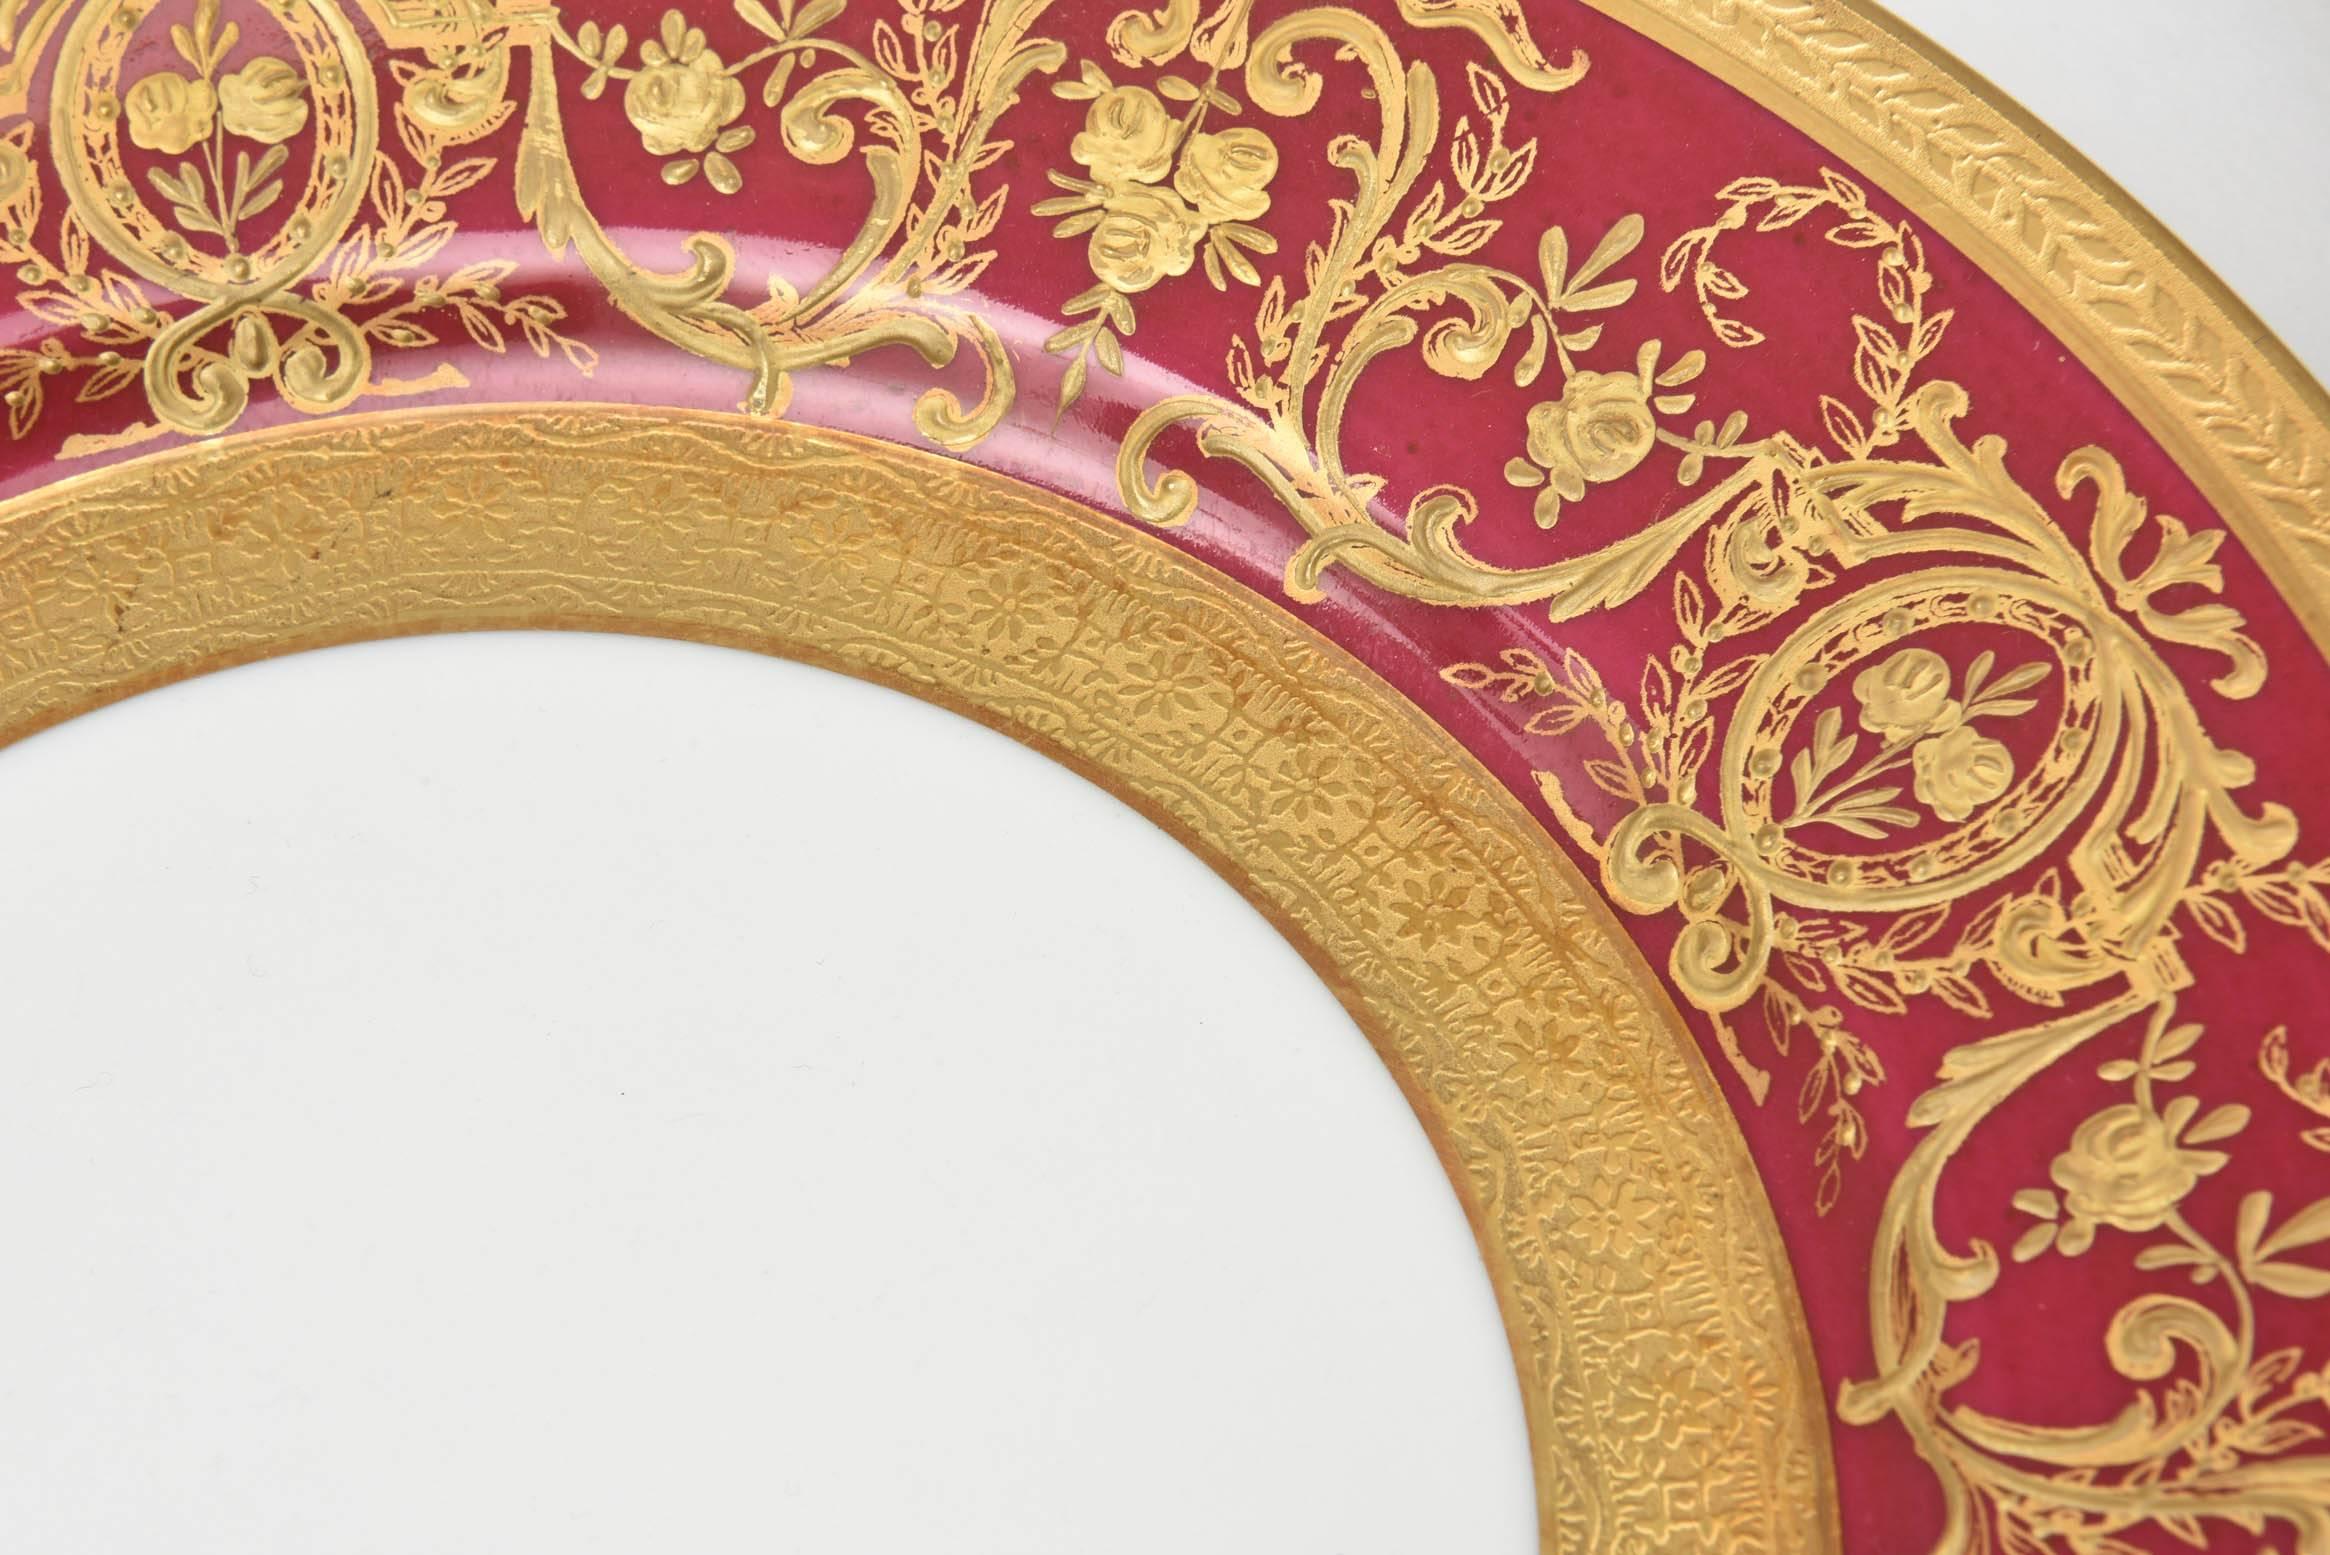 Early 20th Century Extensive Rare Rich Ruby Gilt Encrusted China Dinner Service, Paris